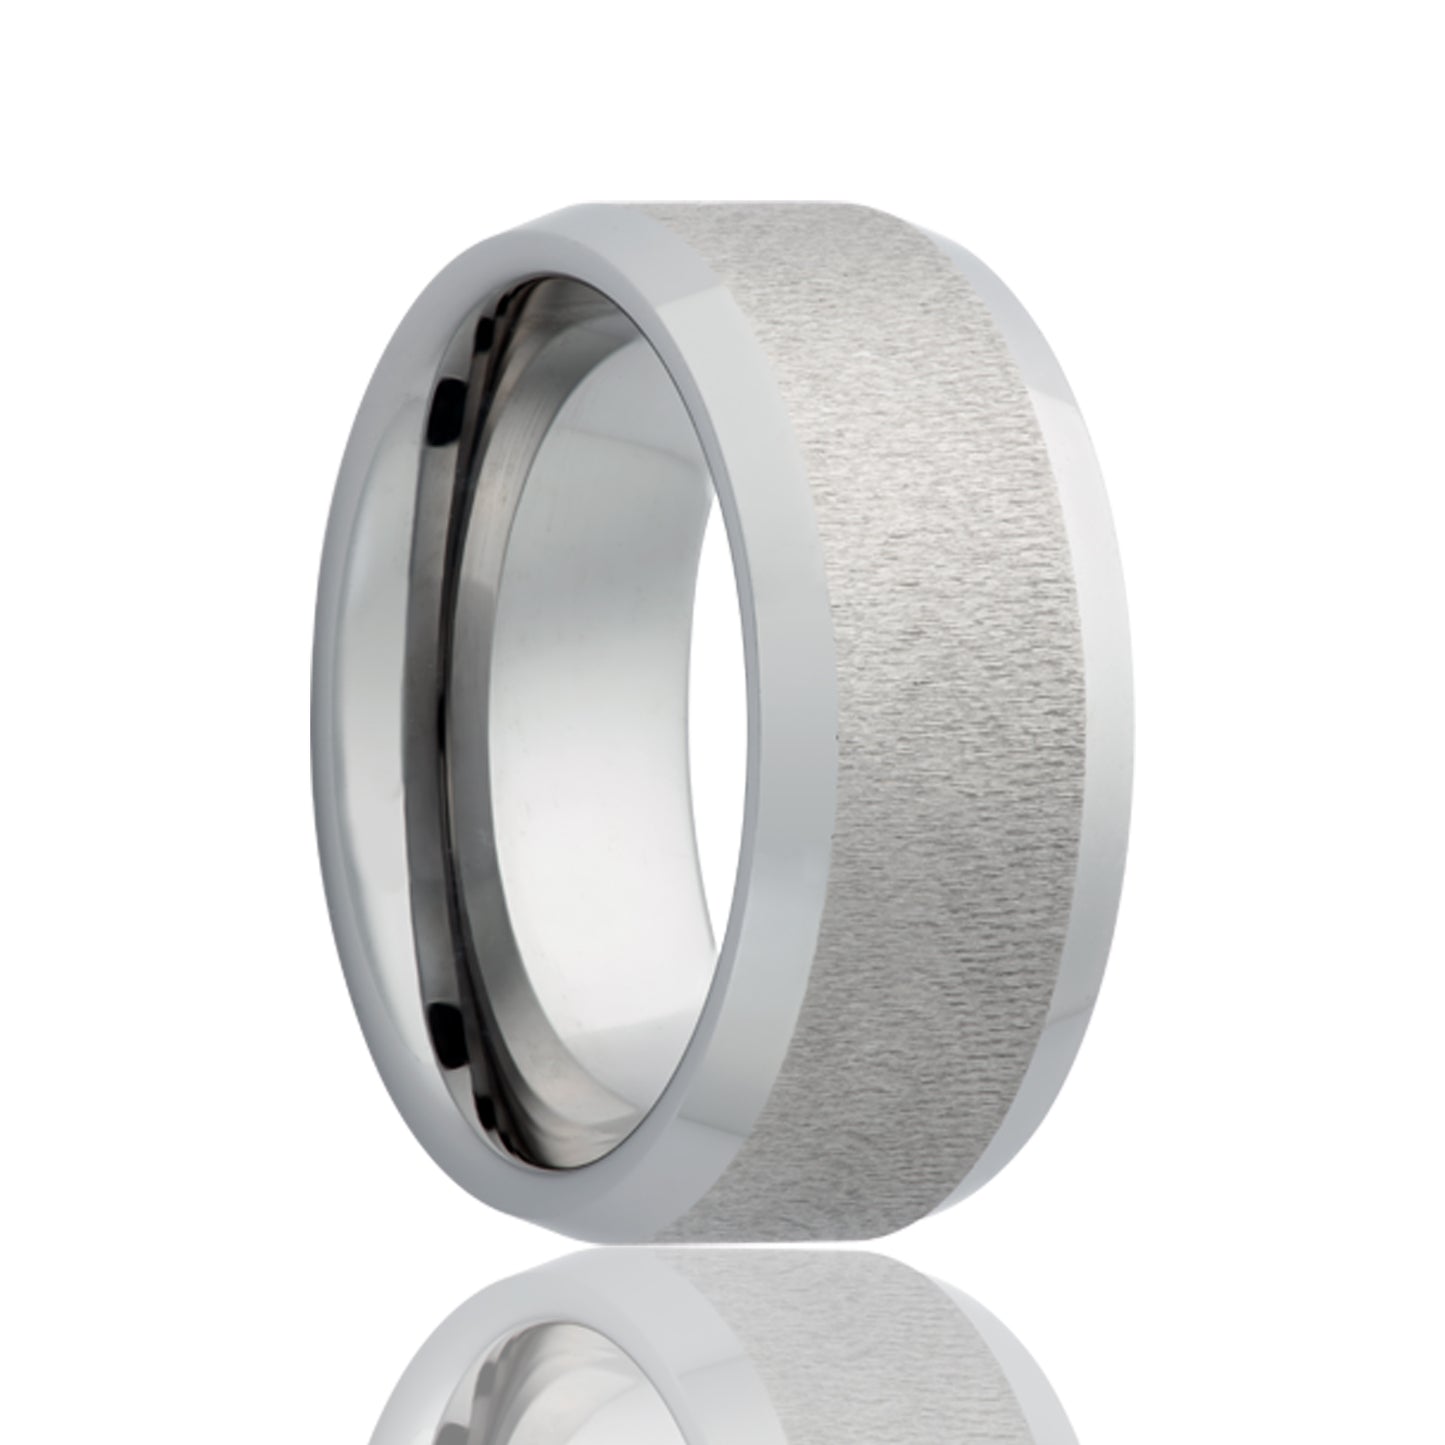 A textured finish cobalt wedding band with beveled edges displayed on a neutral white background.